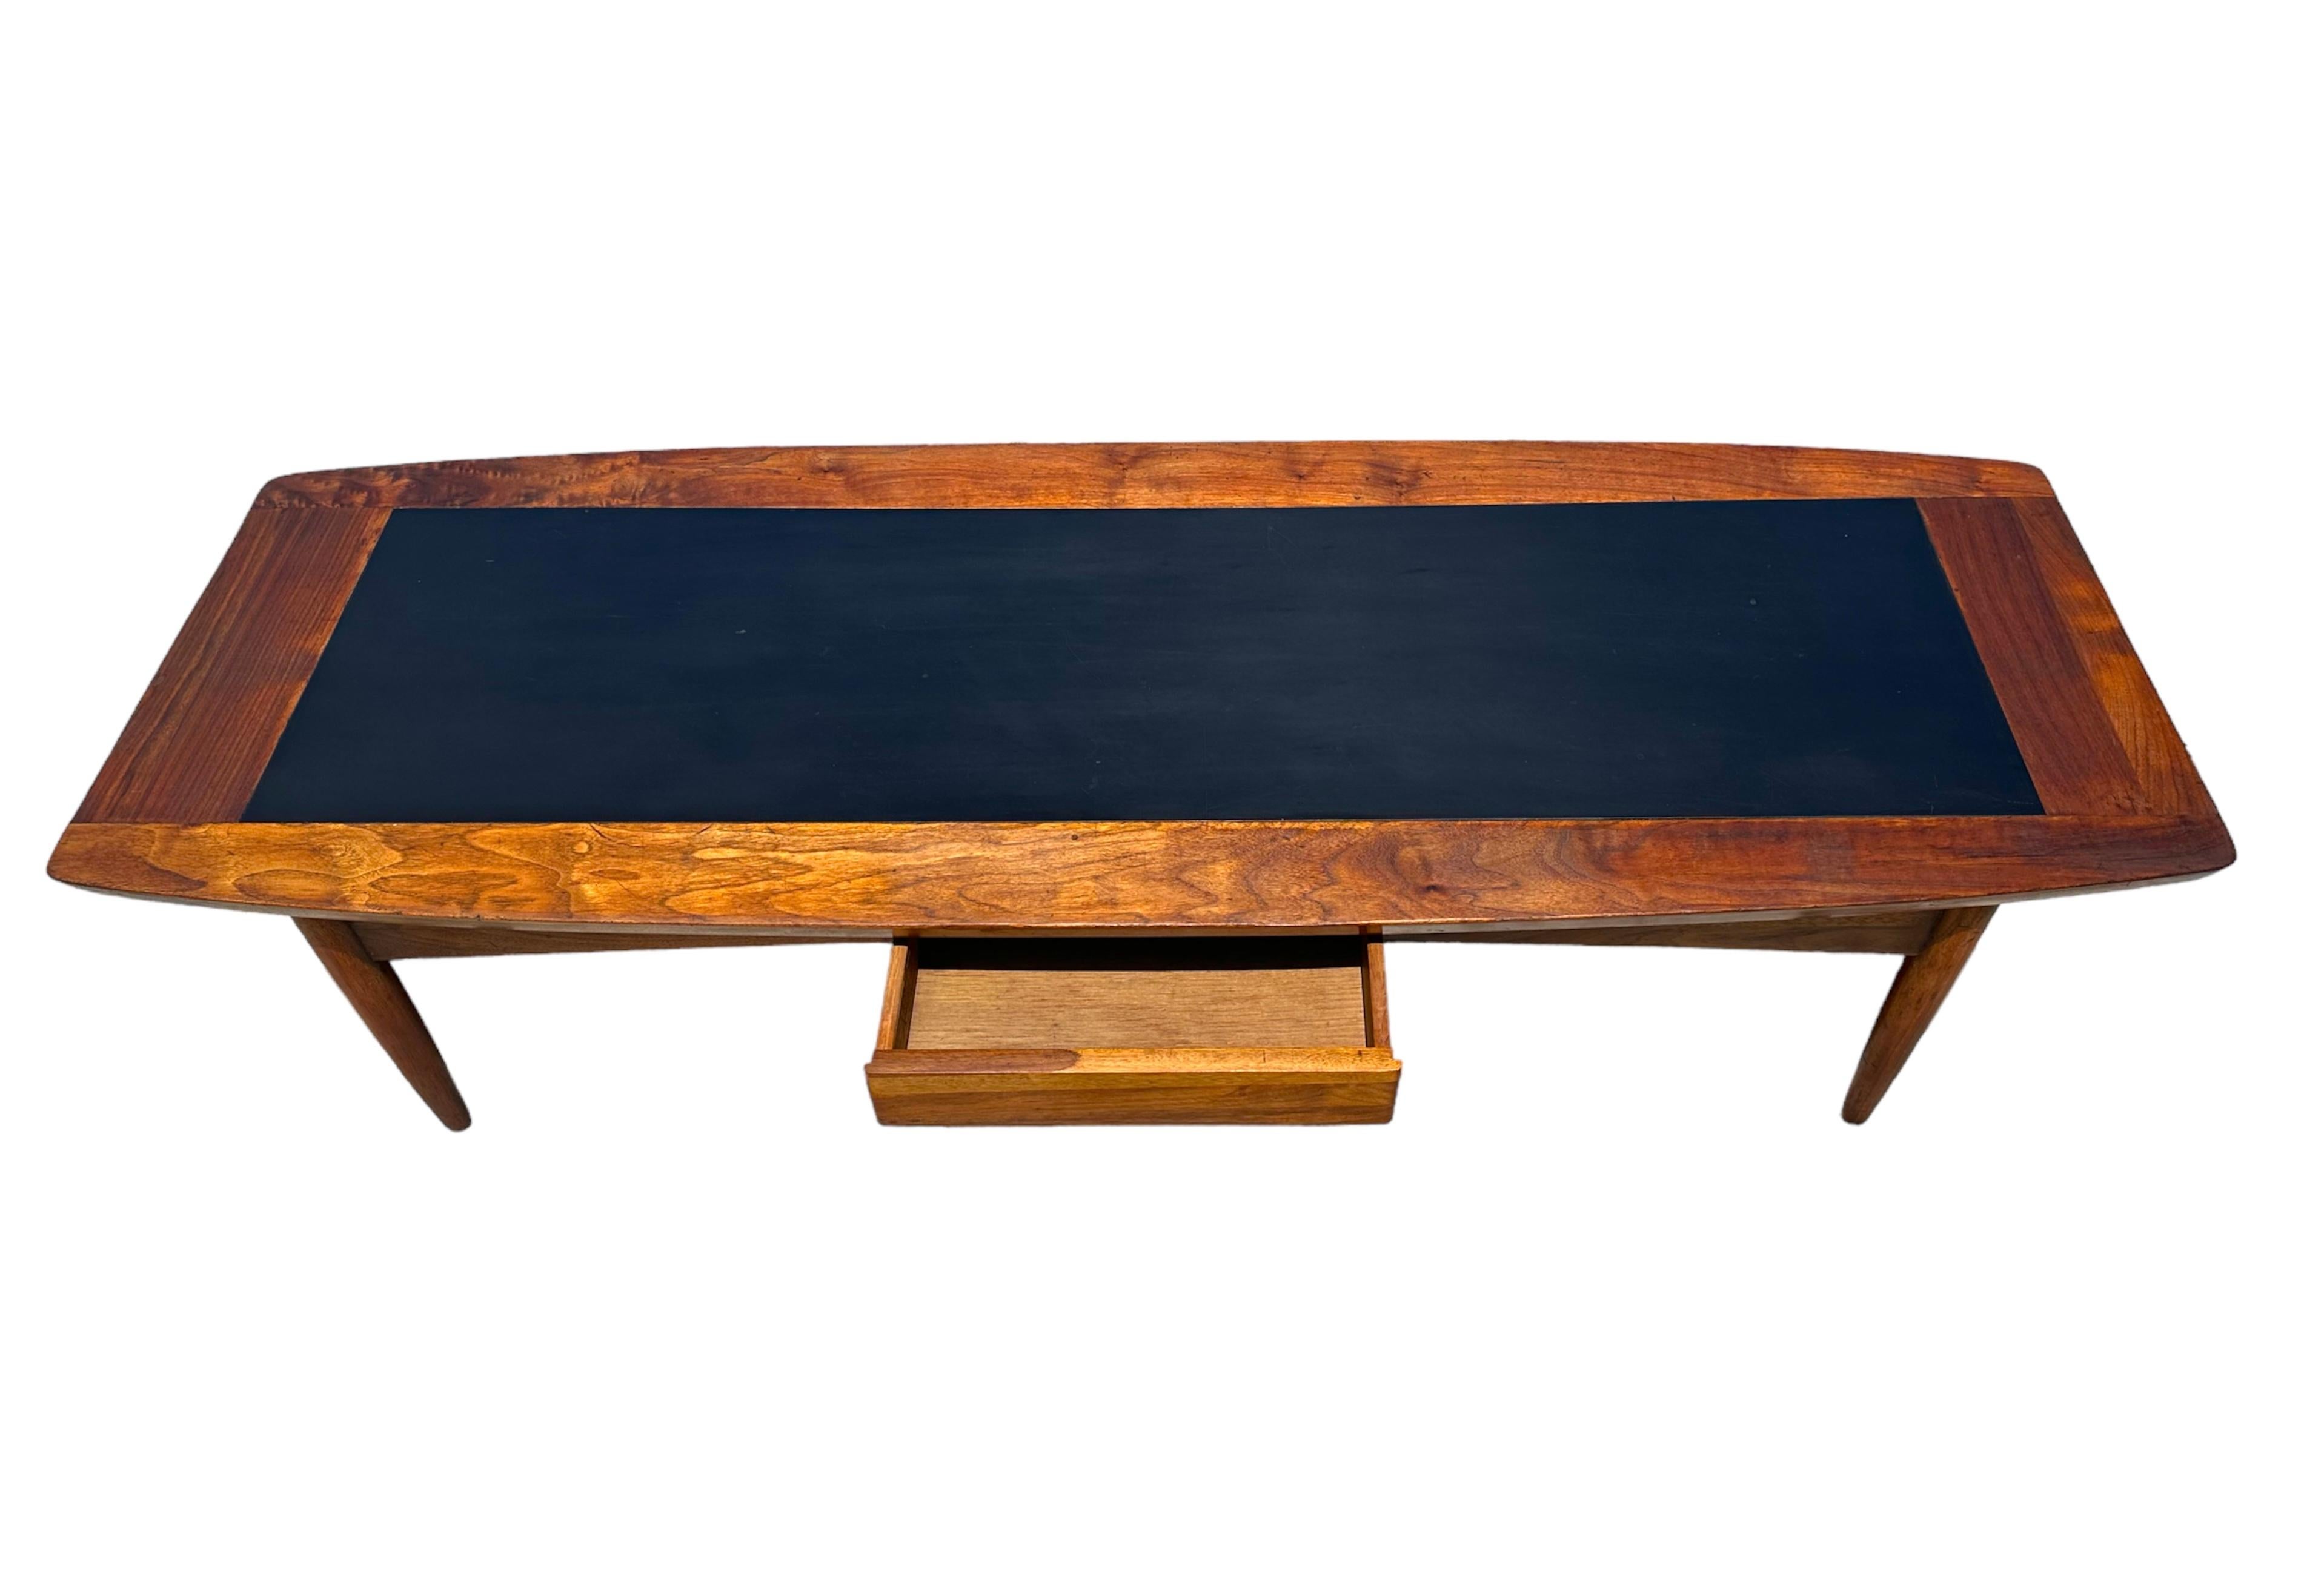 Sleek lines, beautiful and functional. This is a MCM American for Martinsville walnut coffee table. If your looking for a sleek look with room for remote controls, this is it.